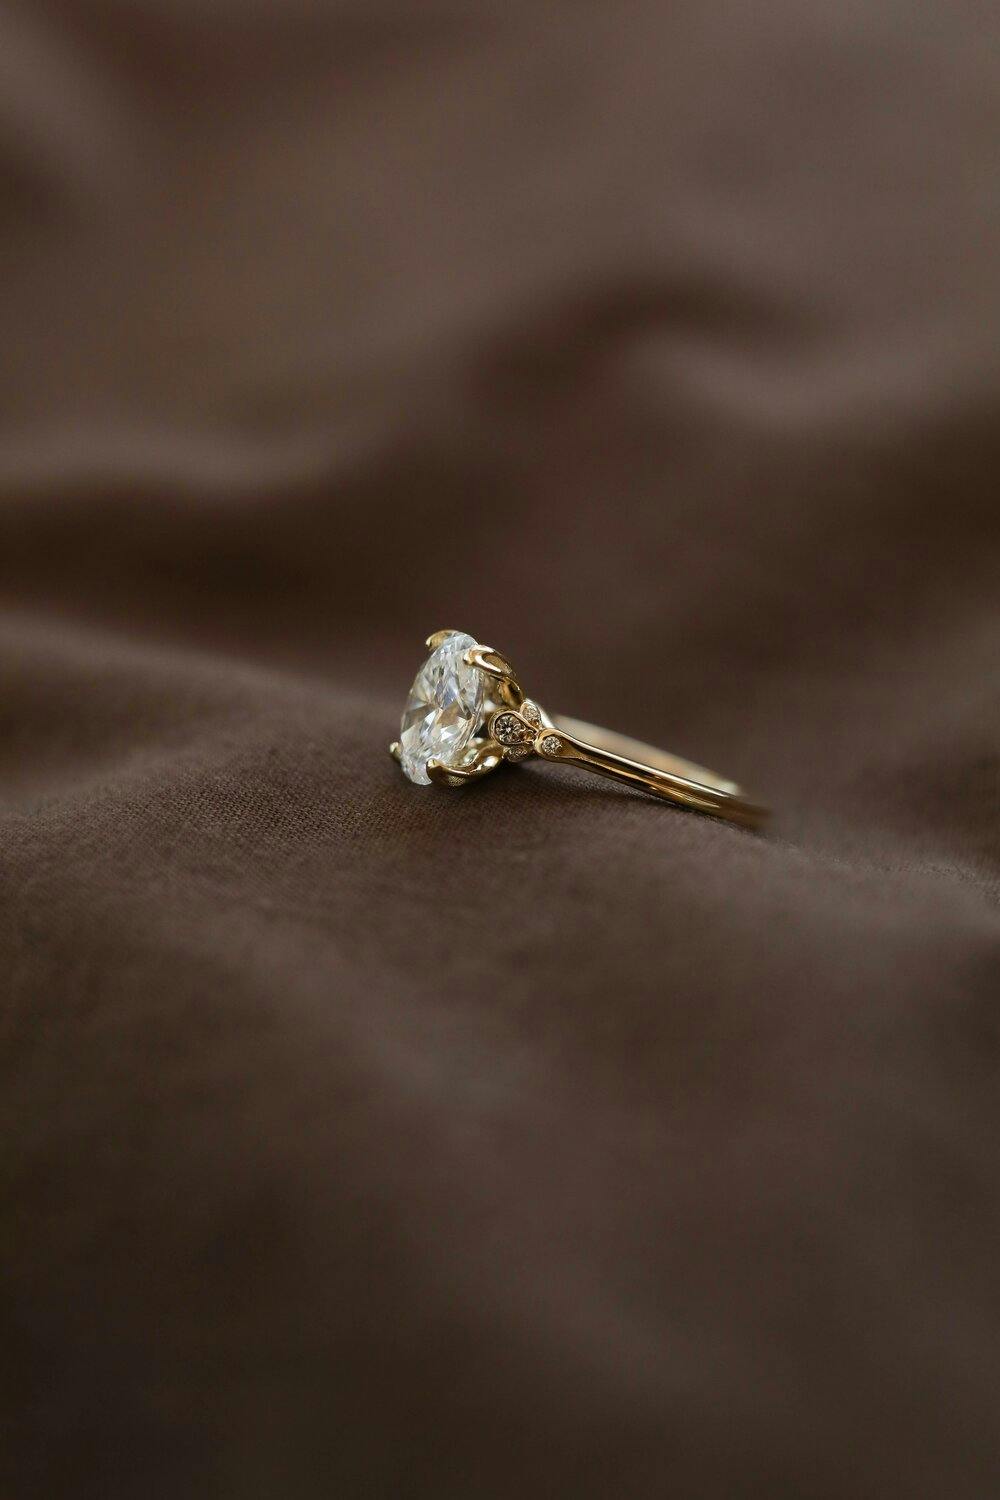 Close up photo of oval, diamond engagement ring with tulip prongs and band detail.